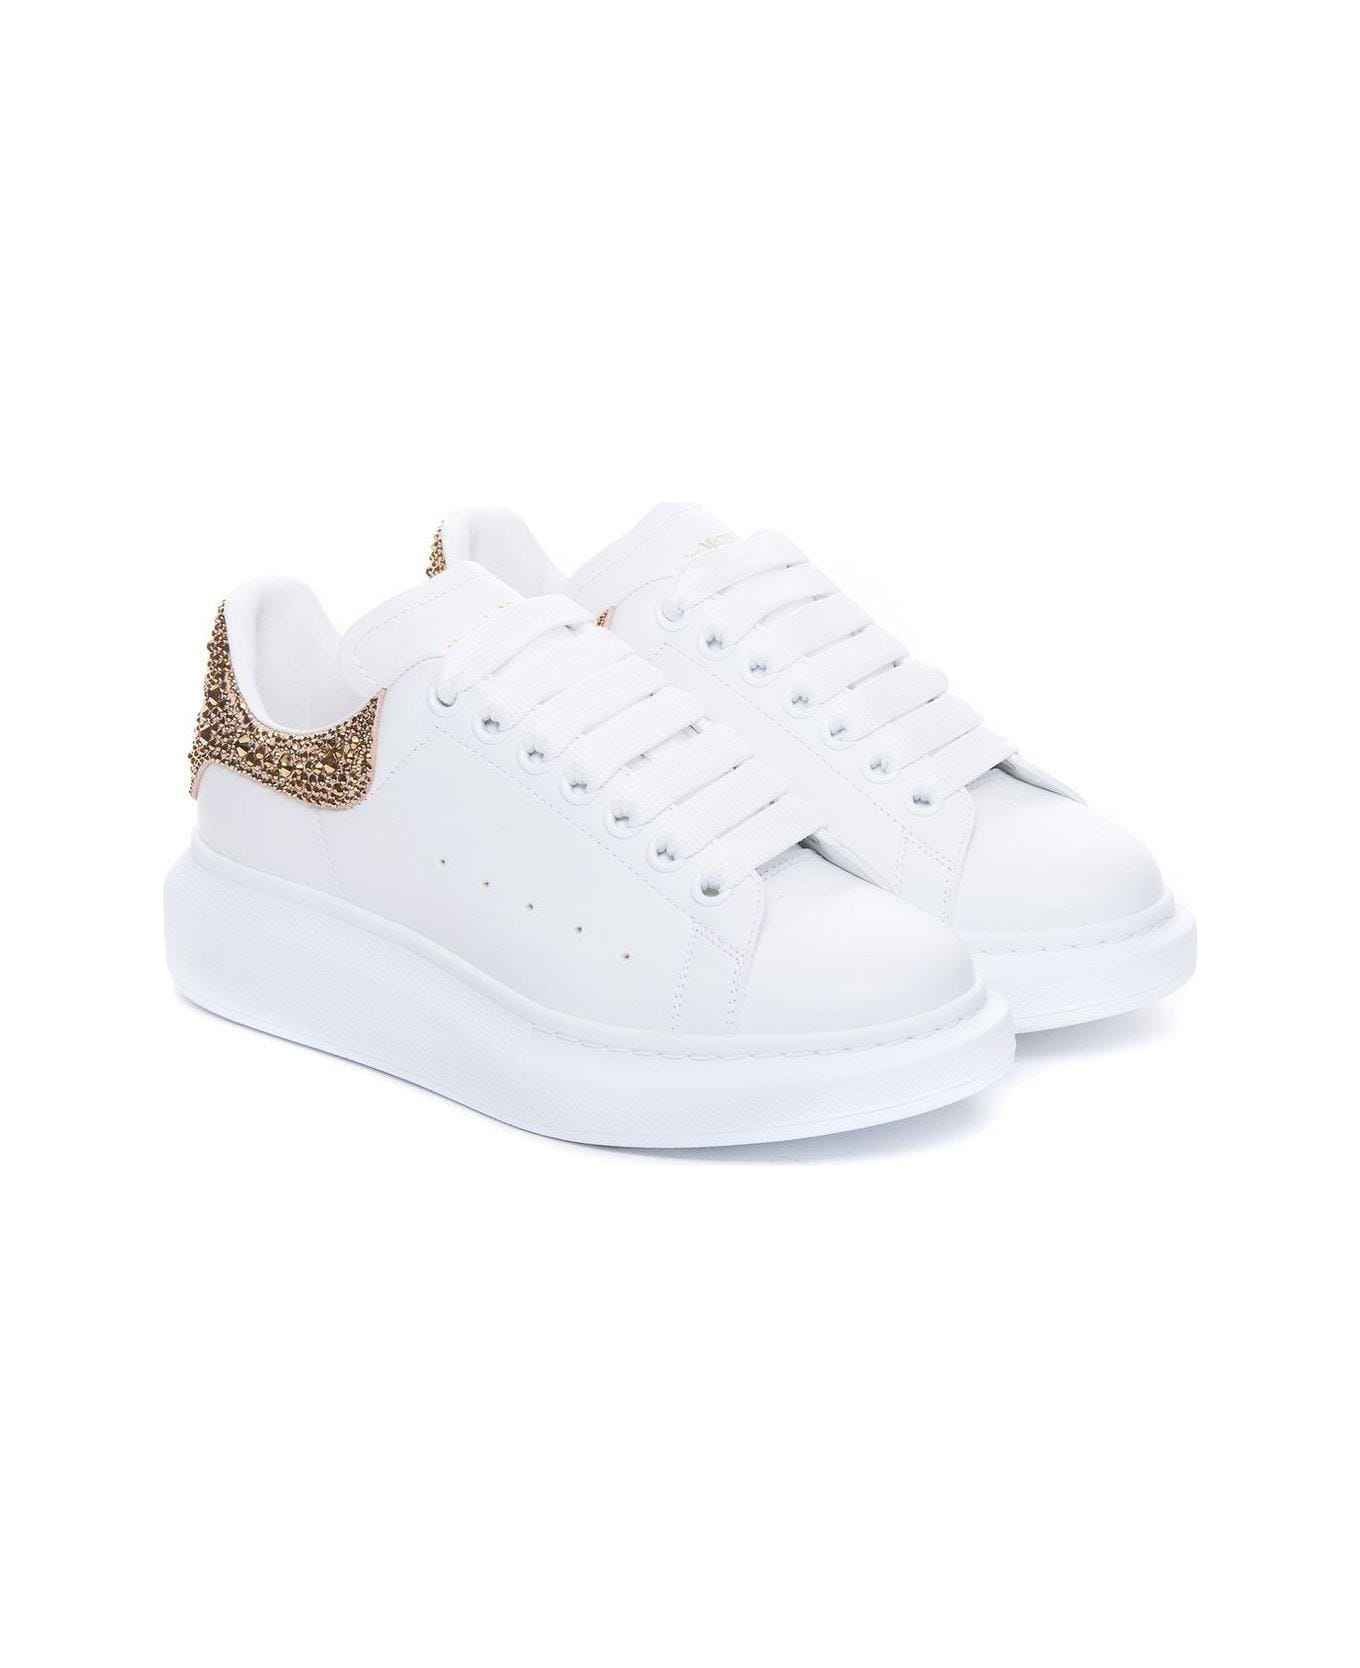 Alexander McQueen Oversized Lace-up Sneakers - White/gold スニーカー